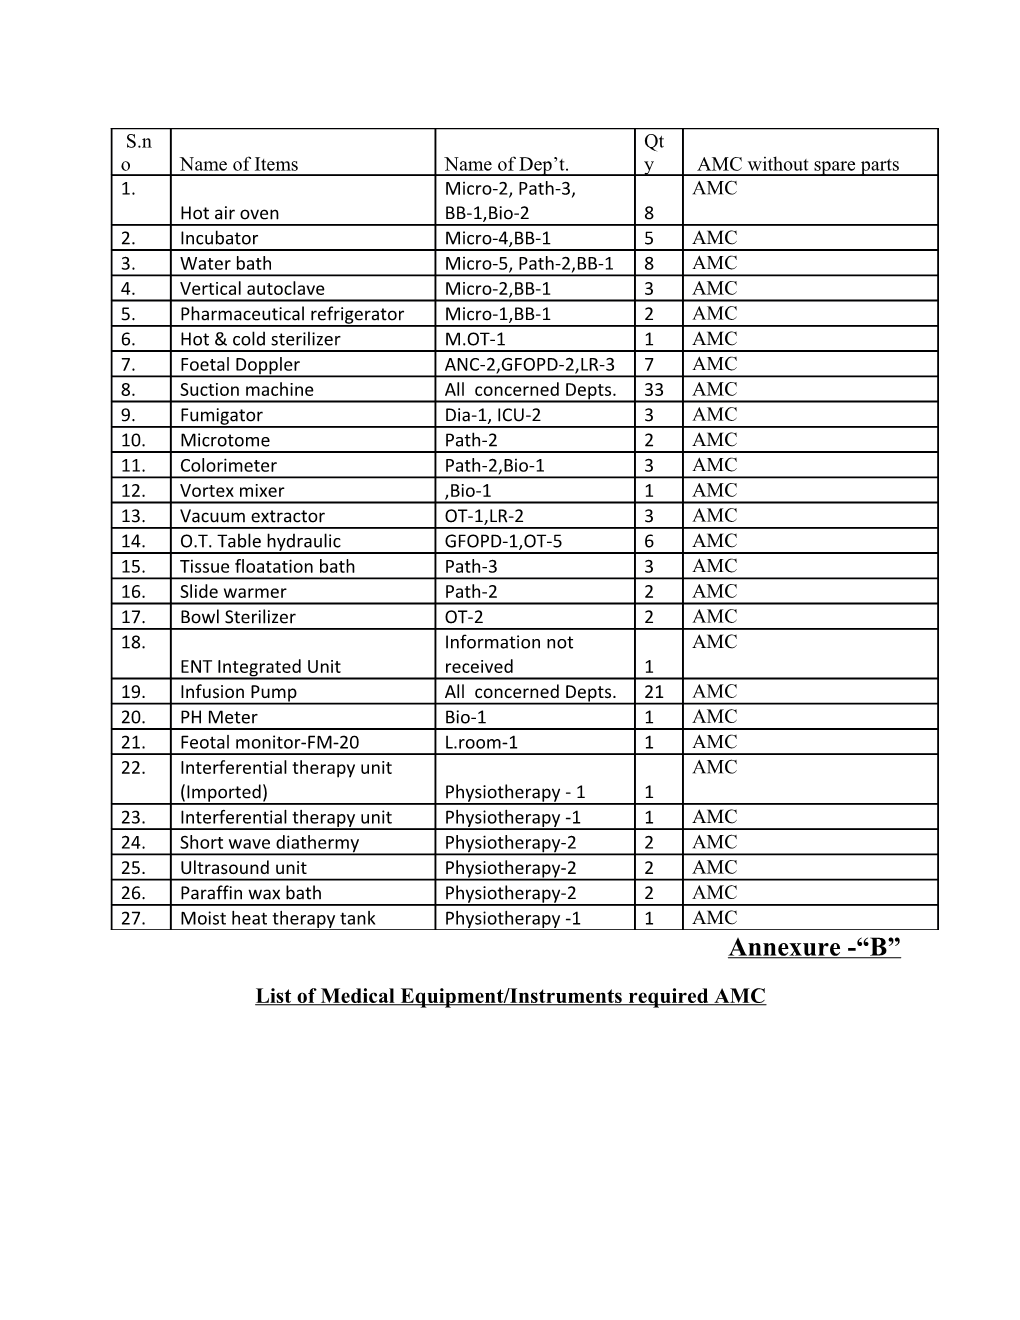 List of Medical Equipment/Instruments Required AMC